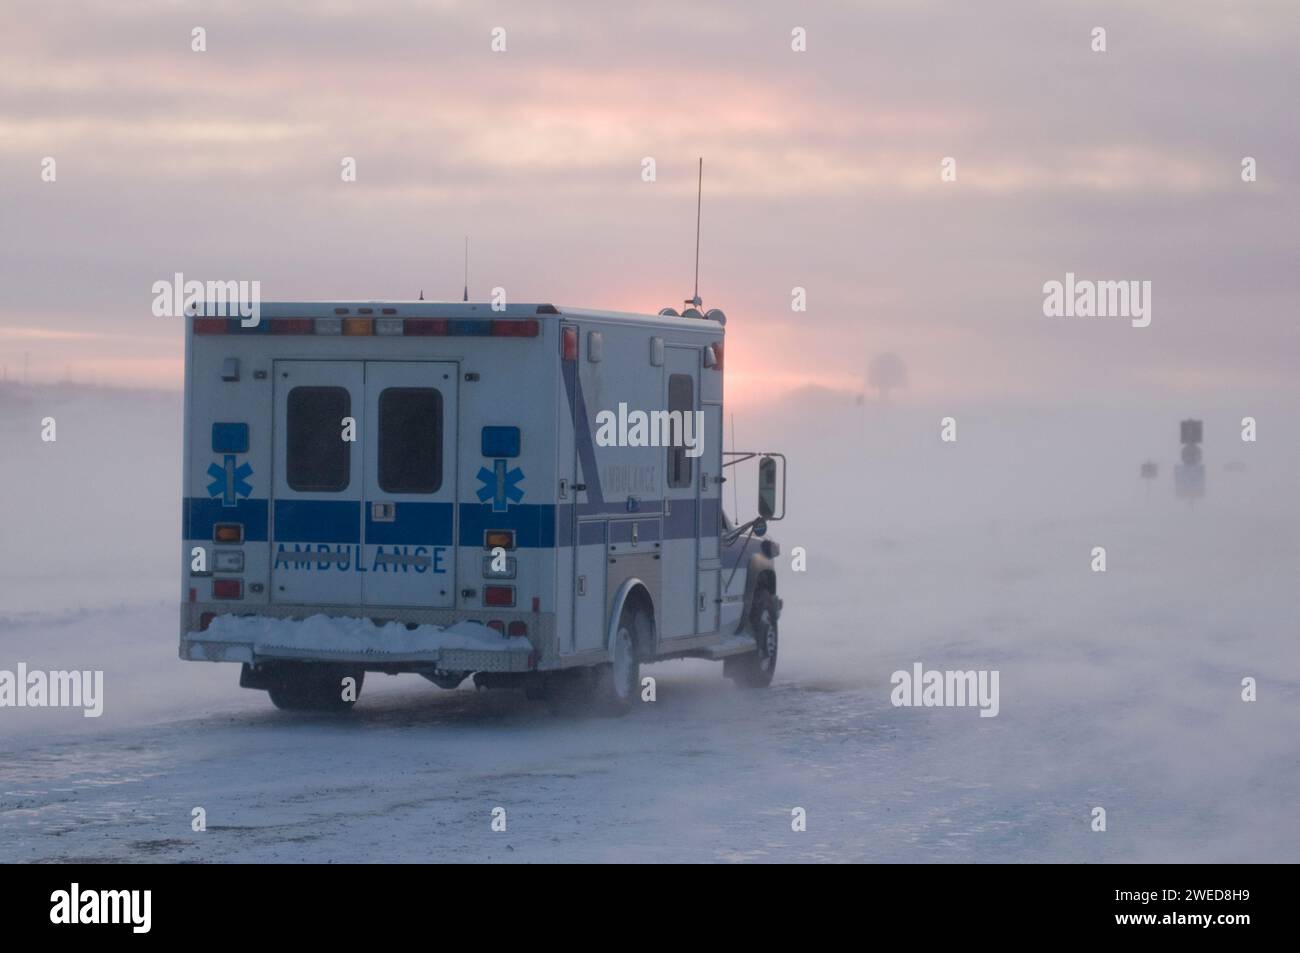 Ambulance drives through the Inupiaq village of Kaktovik during a blizzard at sunset, Barter Island, 1002 area of the Arctic National Wildlife Refuge, Stock Photo